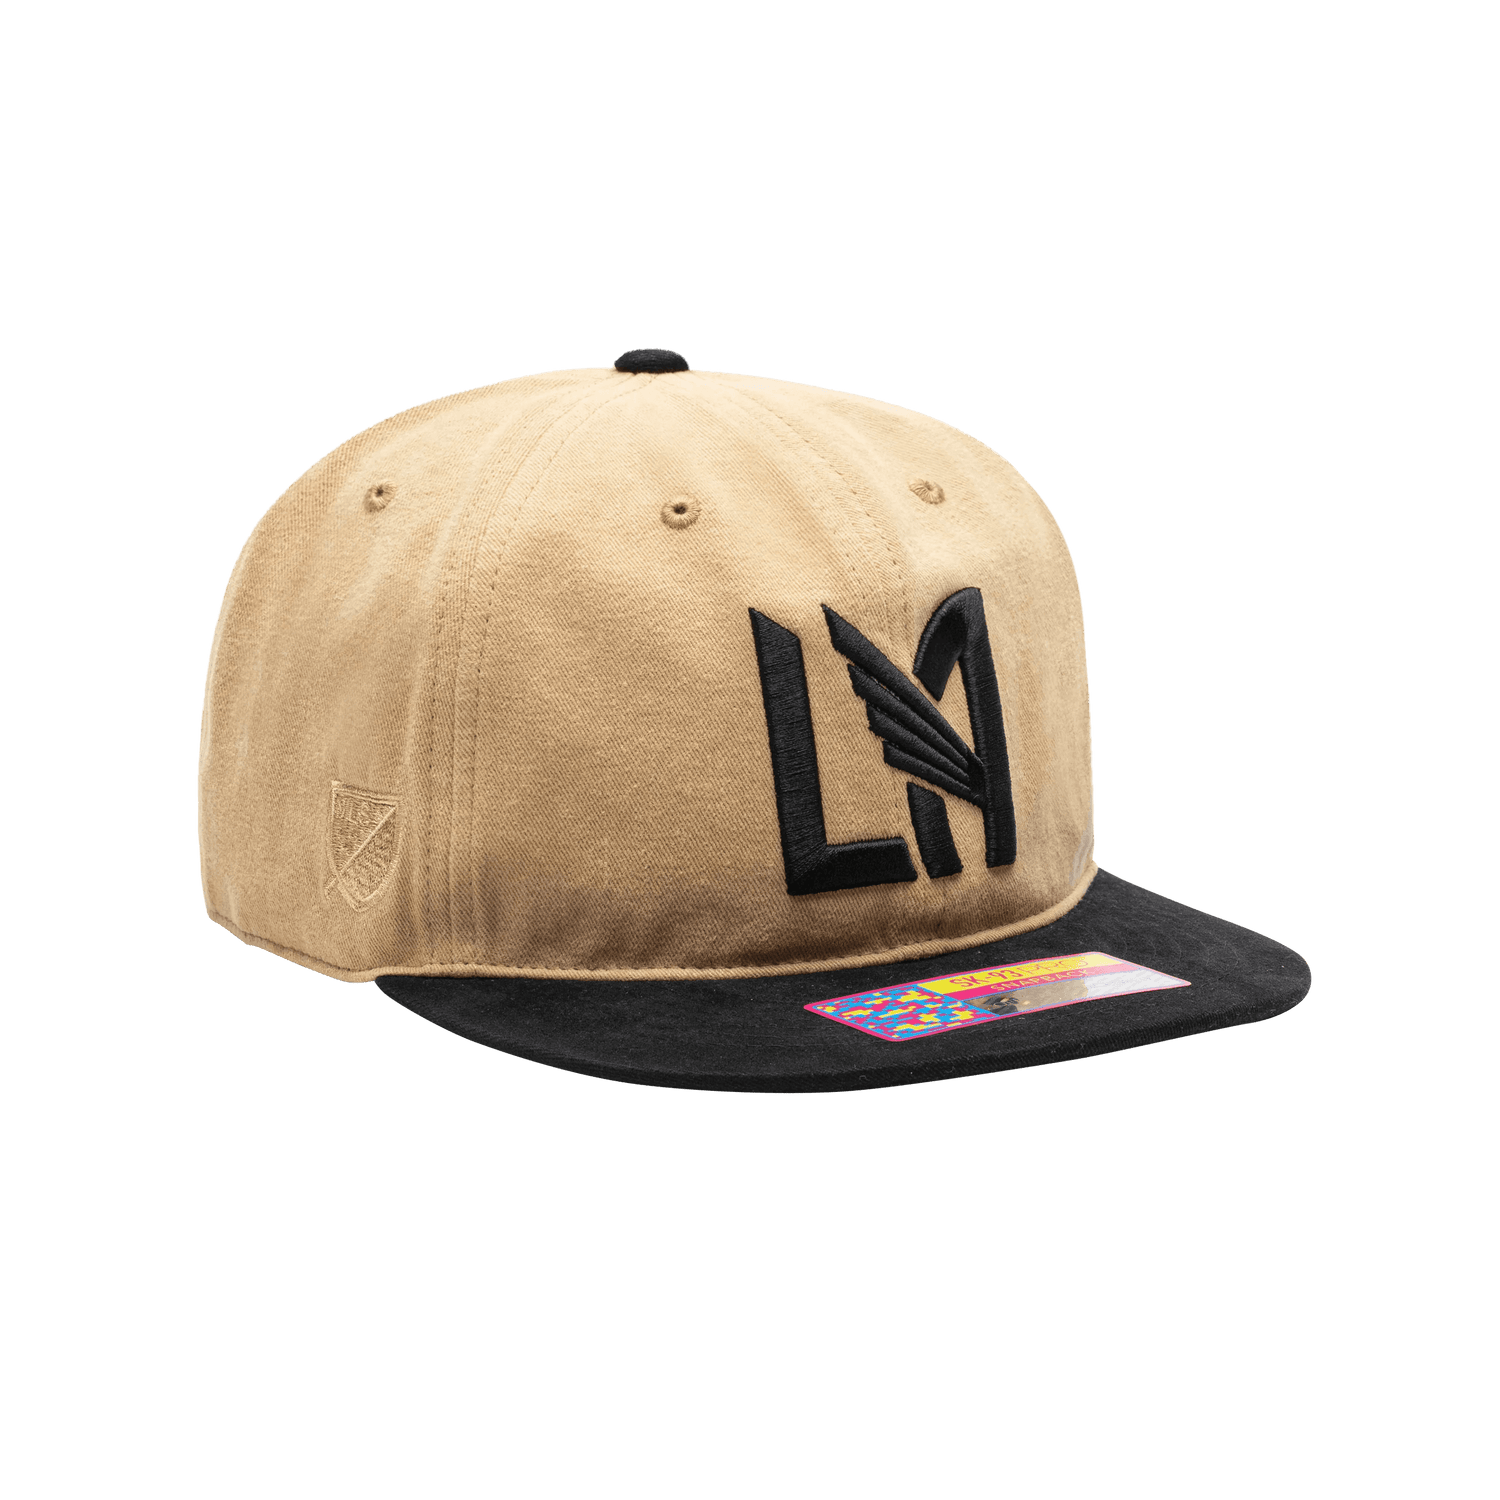 FI Collection LAFC Swingman Snapback Hat (Lateral - Side 2)